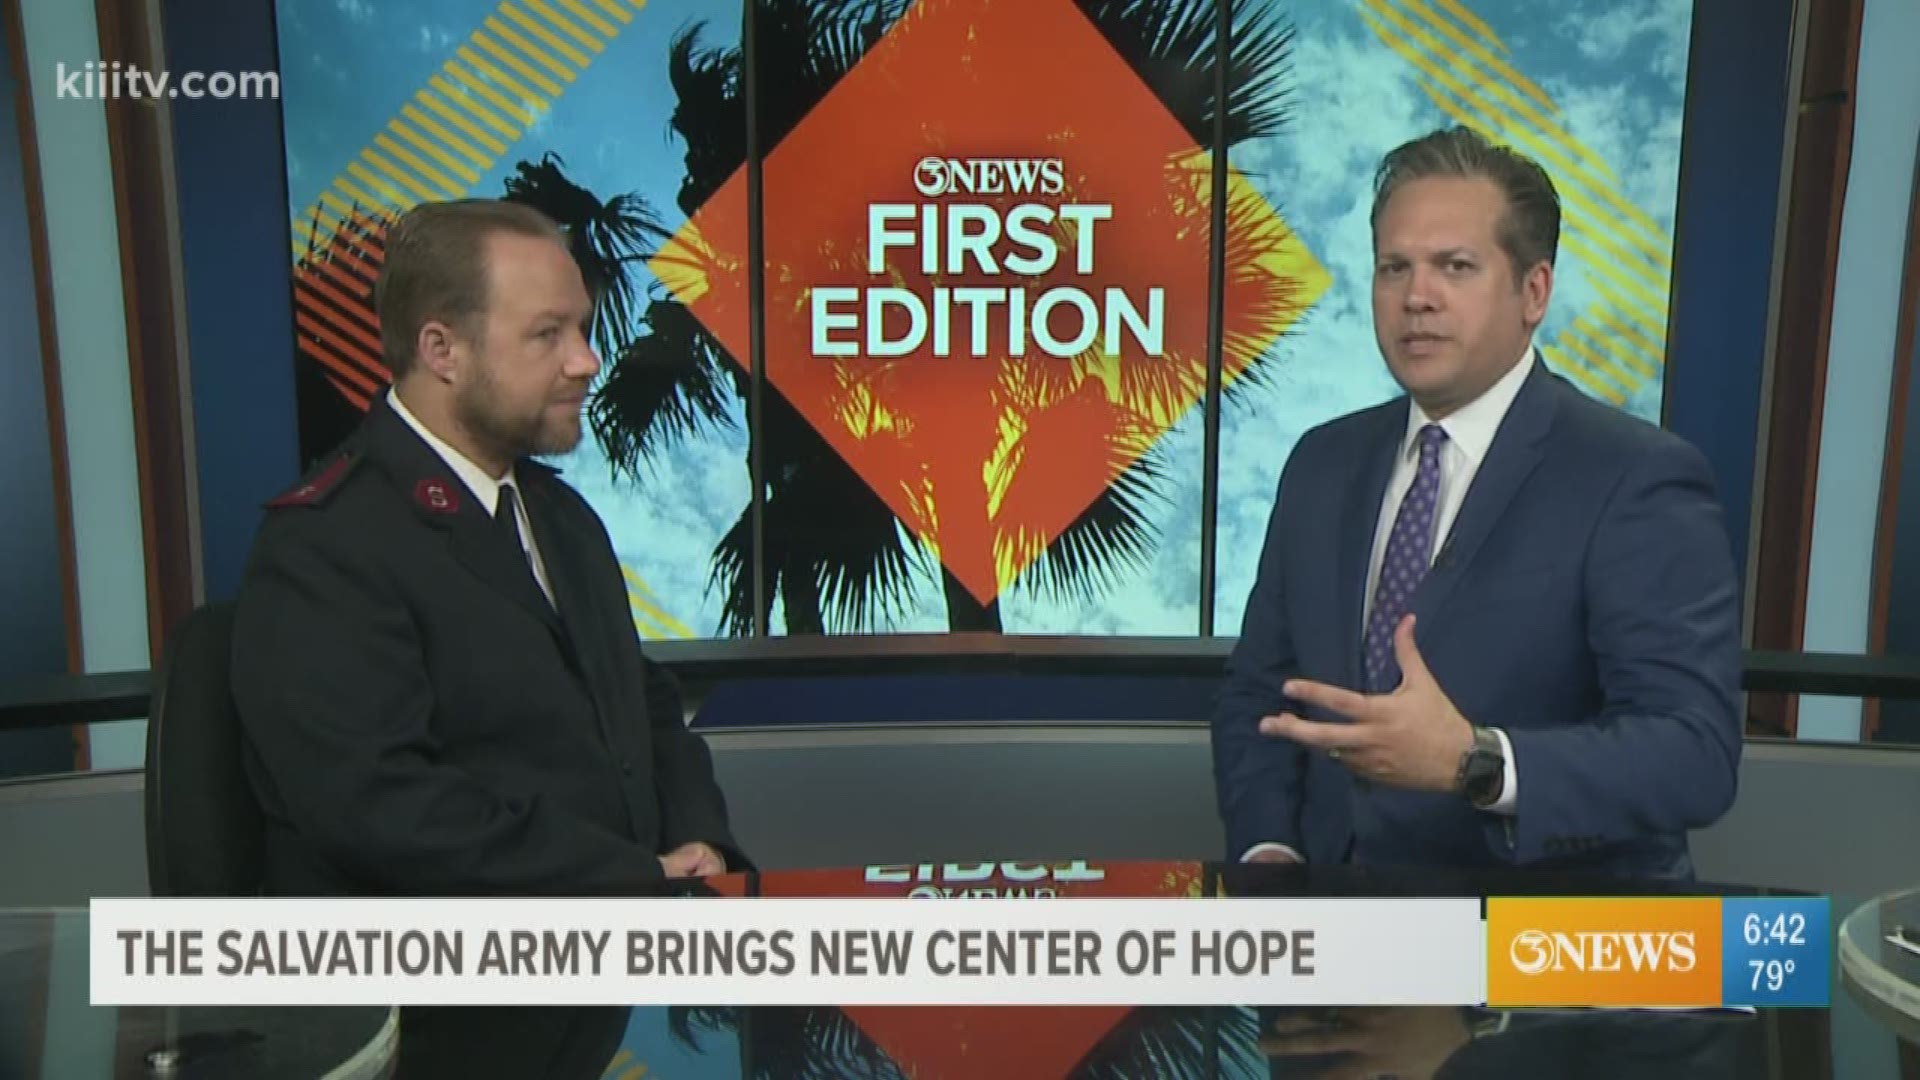 Discussing the new Center of Hope being created by the Salvation Army.